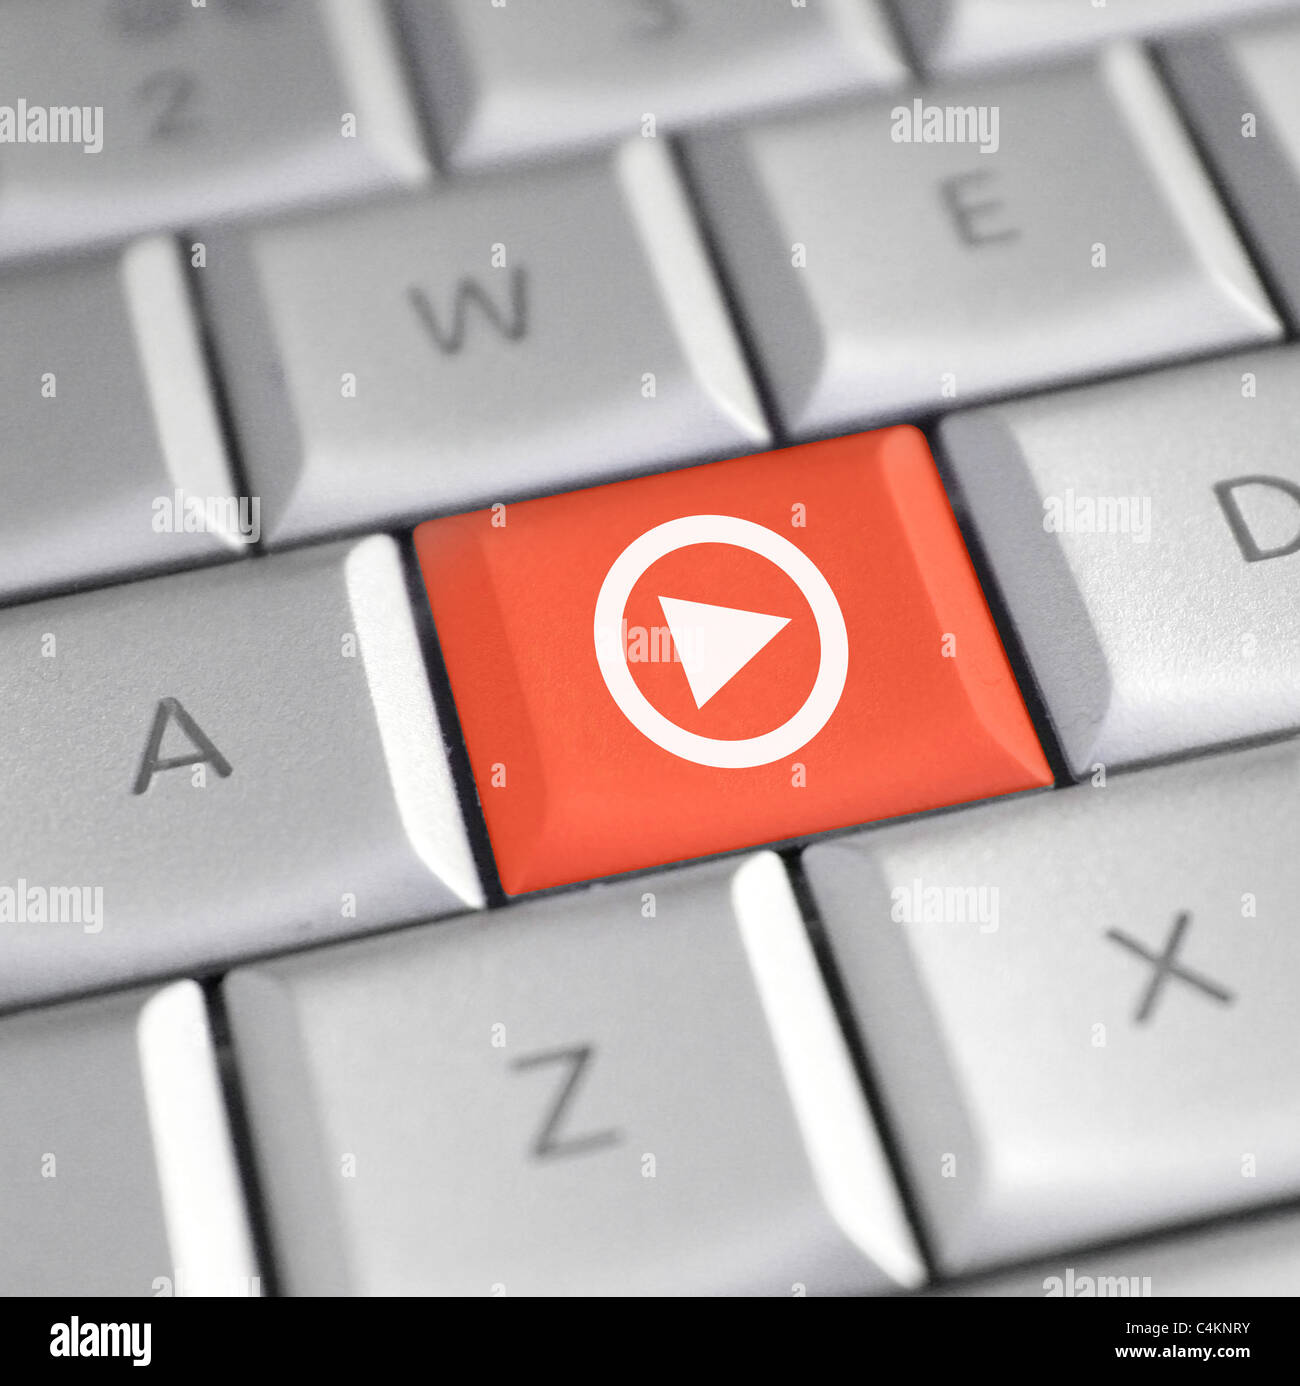 Play button on keyboard Stock Photo